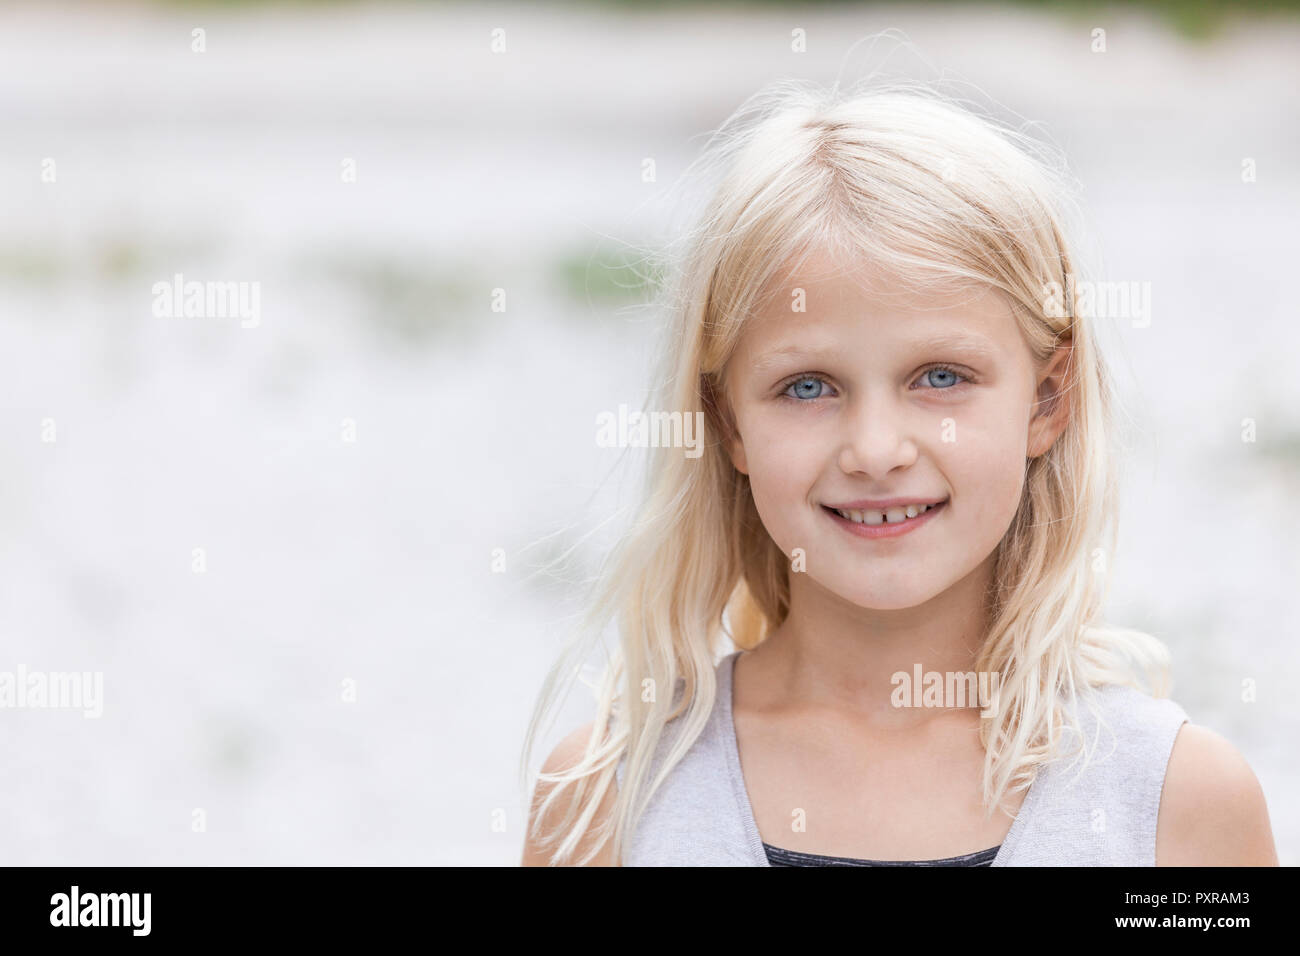 Portrait of smiling girl outdoors Stock Photo